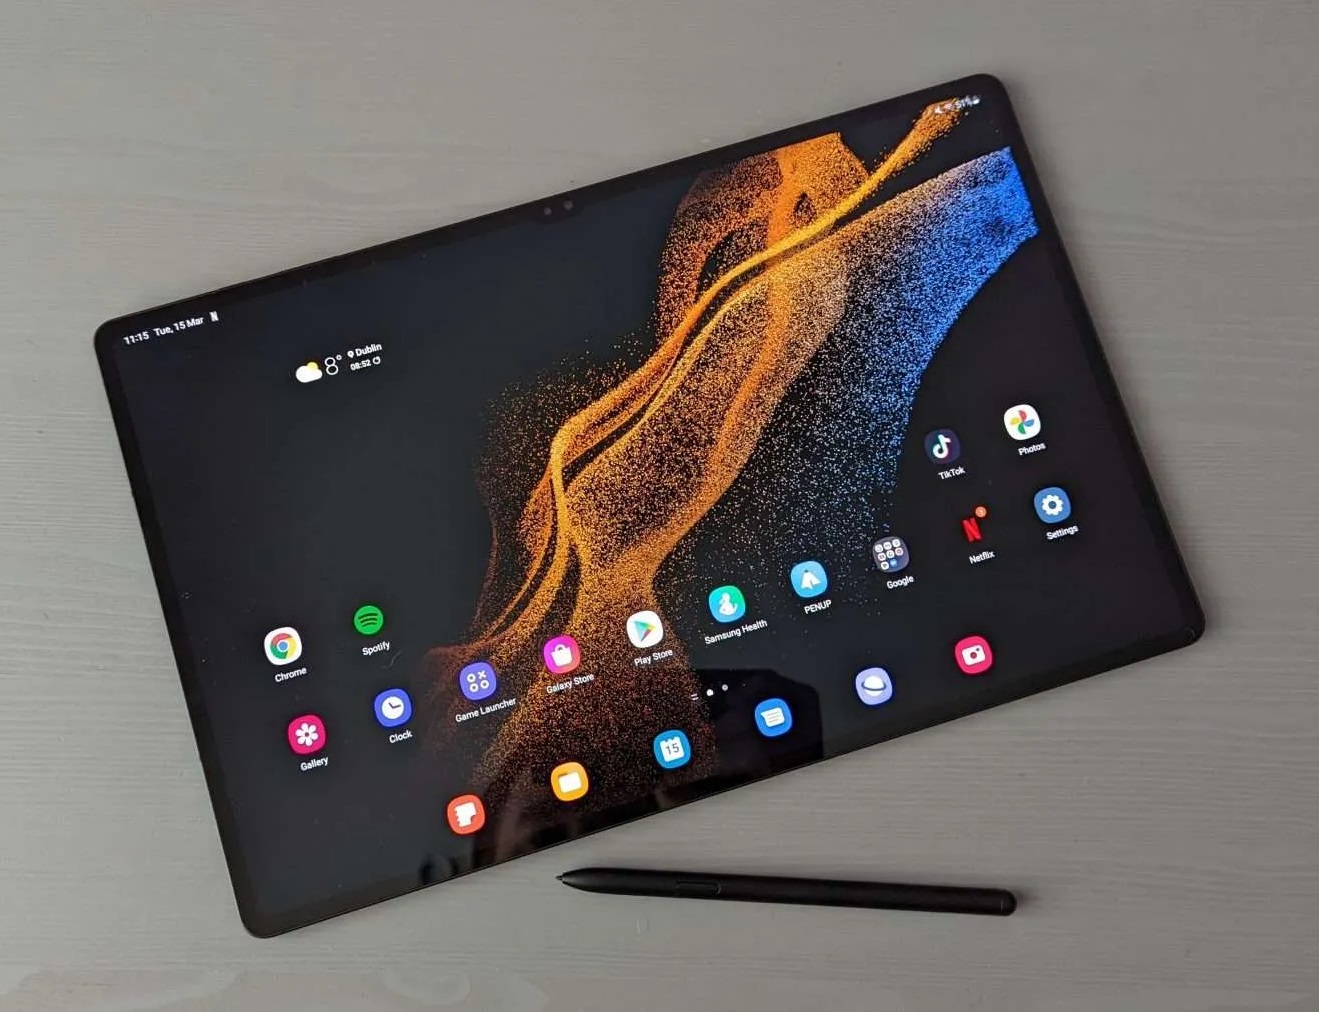 Samsung Galaxy Tab S9 series may not be equipped with the